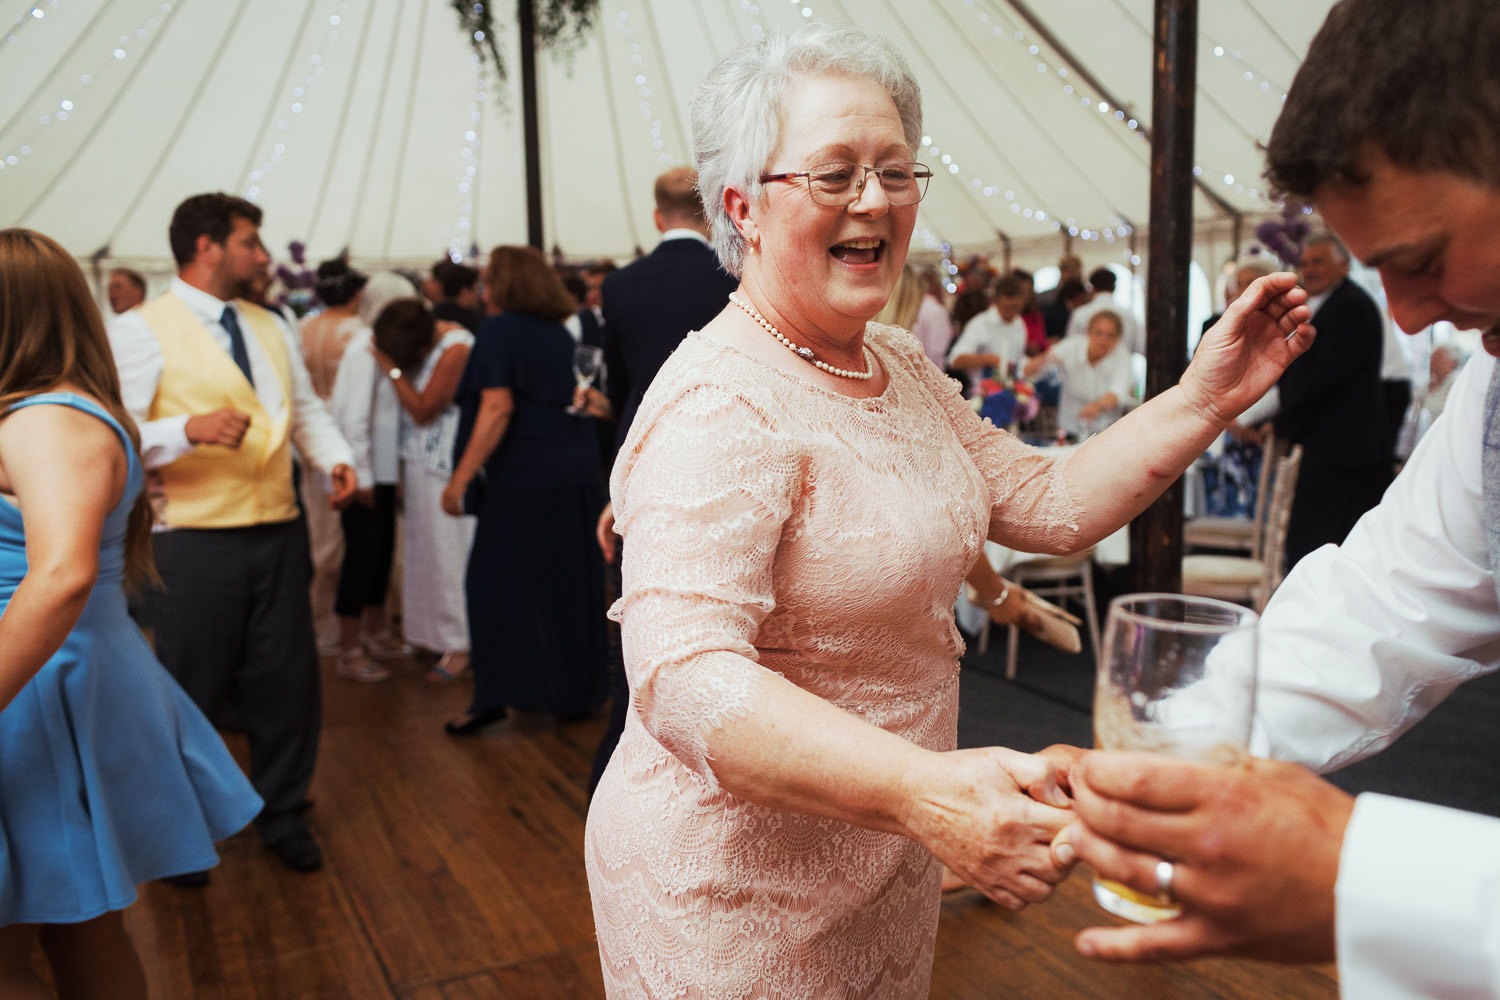 A woman in a peach dress dancing at a wedding in a marquee.